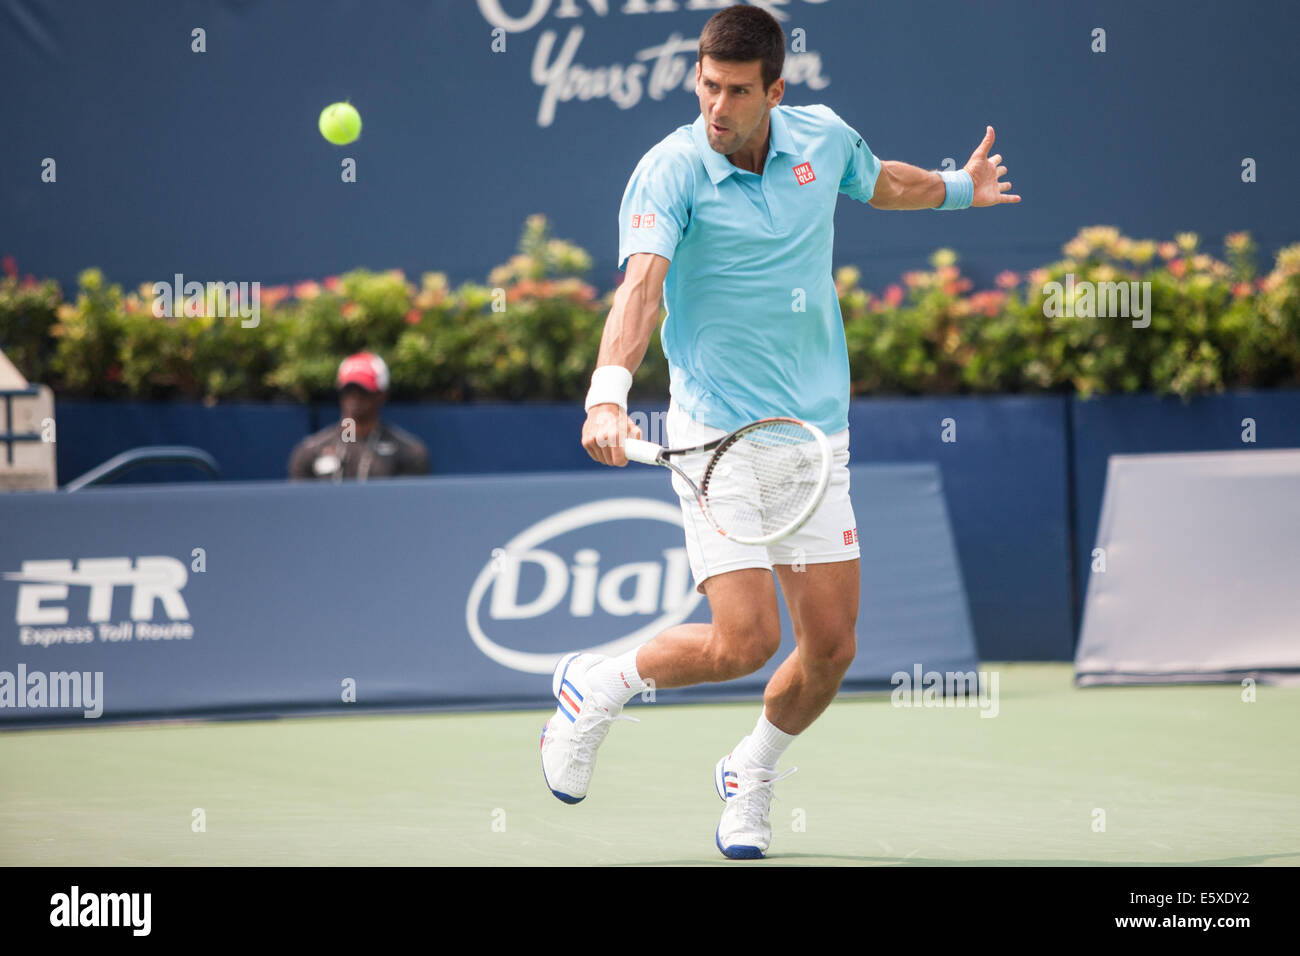 Toronto, Canada. 07th Aug, 2014. Novak Djokovic returns the ball during his match against Jo-Wilfried Tsonga at the 2014 Rogers Cup being played in Toronto on August 7, 2014. Djokovic lost the match in straight sets 6-2, 6-2. Credit:  Mark Spowart/Alamy Live News Stock Photo